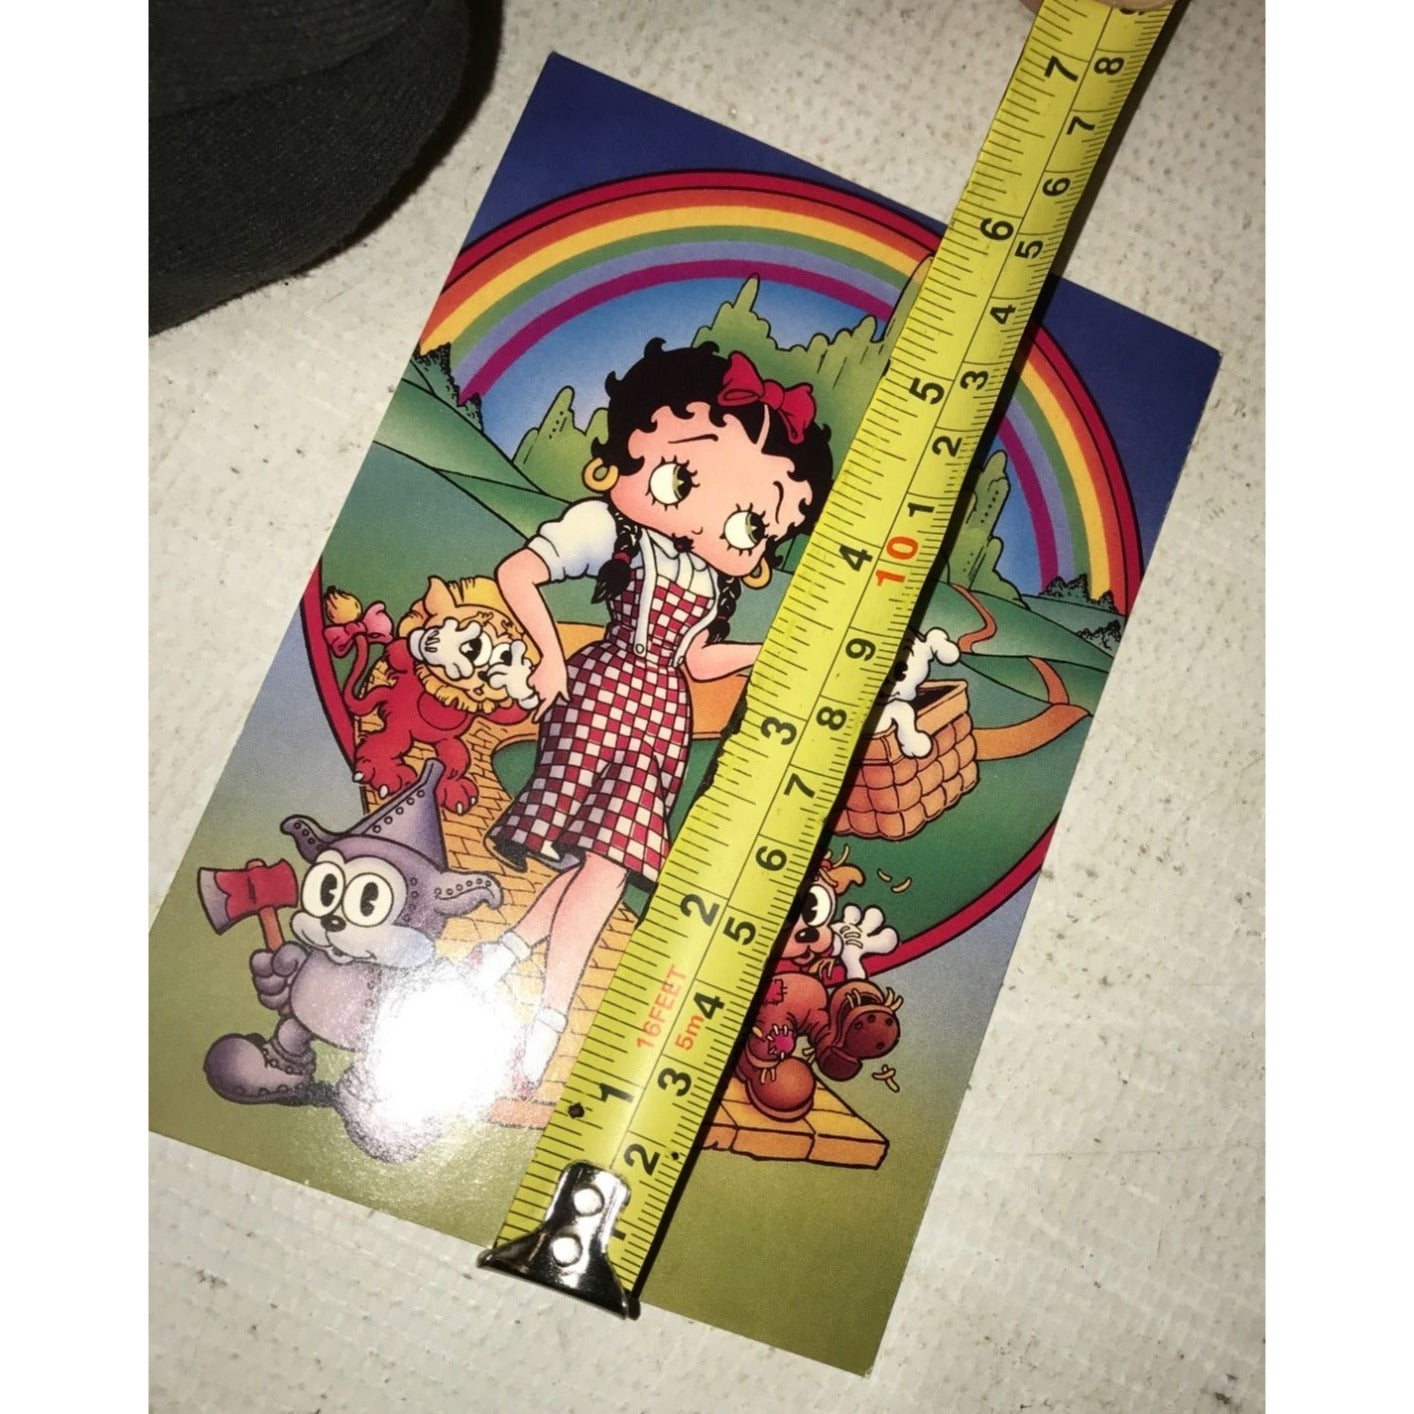 Betty Boop- Boop in the Land of Oz Vintage Postcard- about 6 by 4 inches